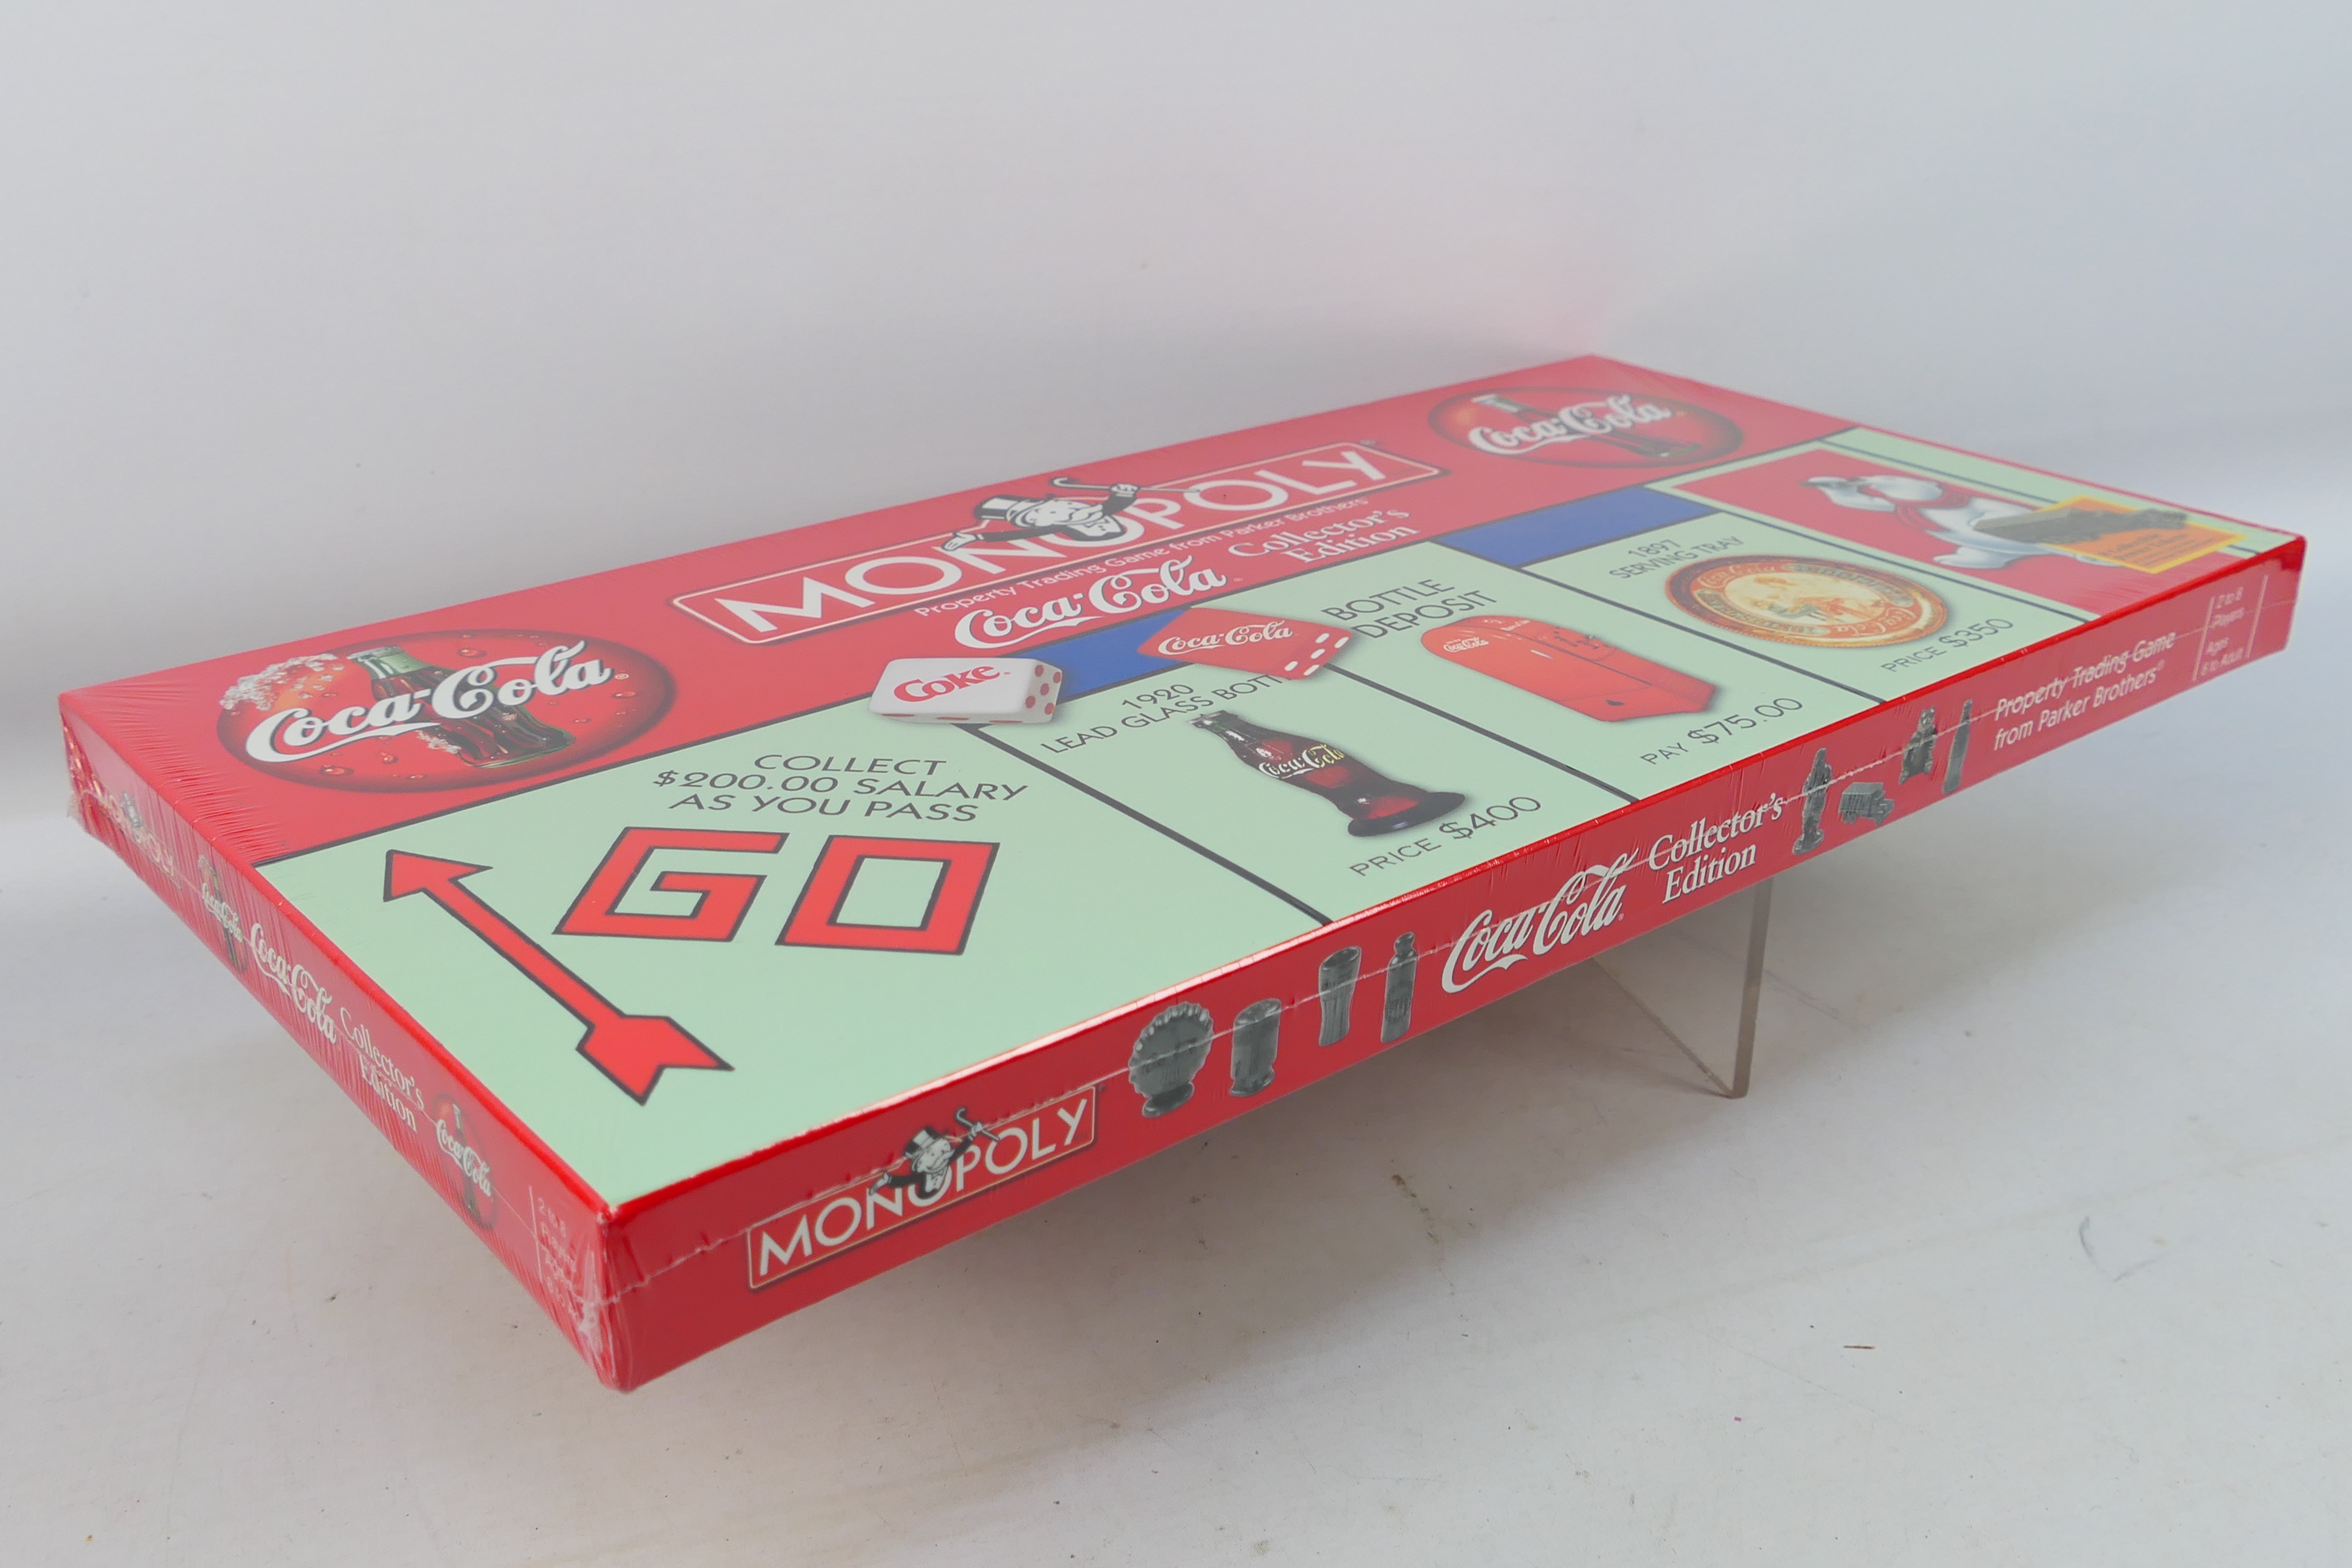 Hasbro - Monopoly - An unopened Coca Col - Image 3 of 3